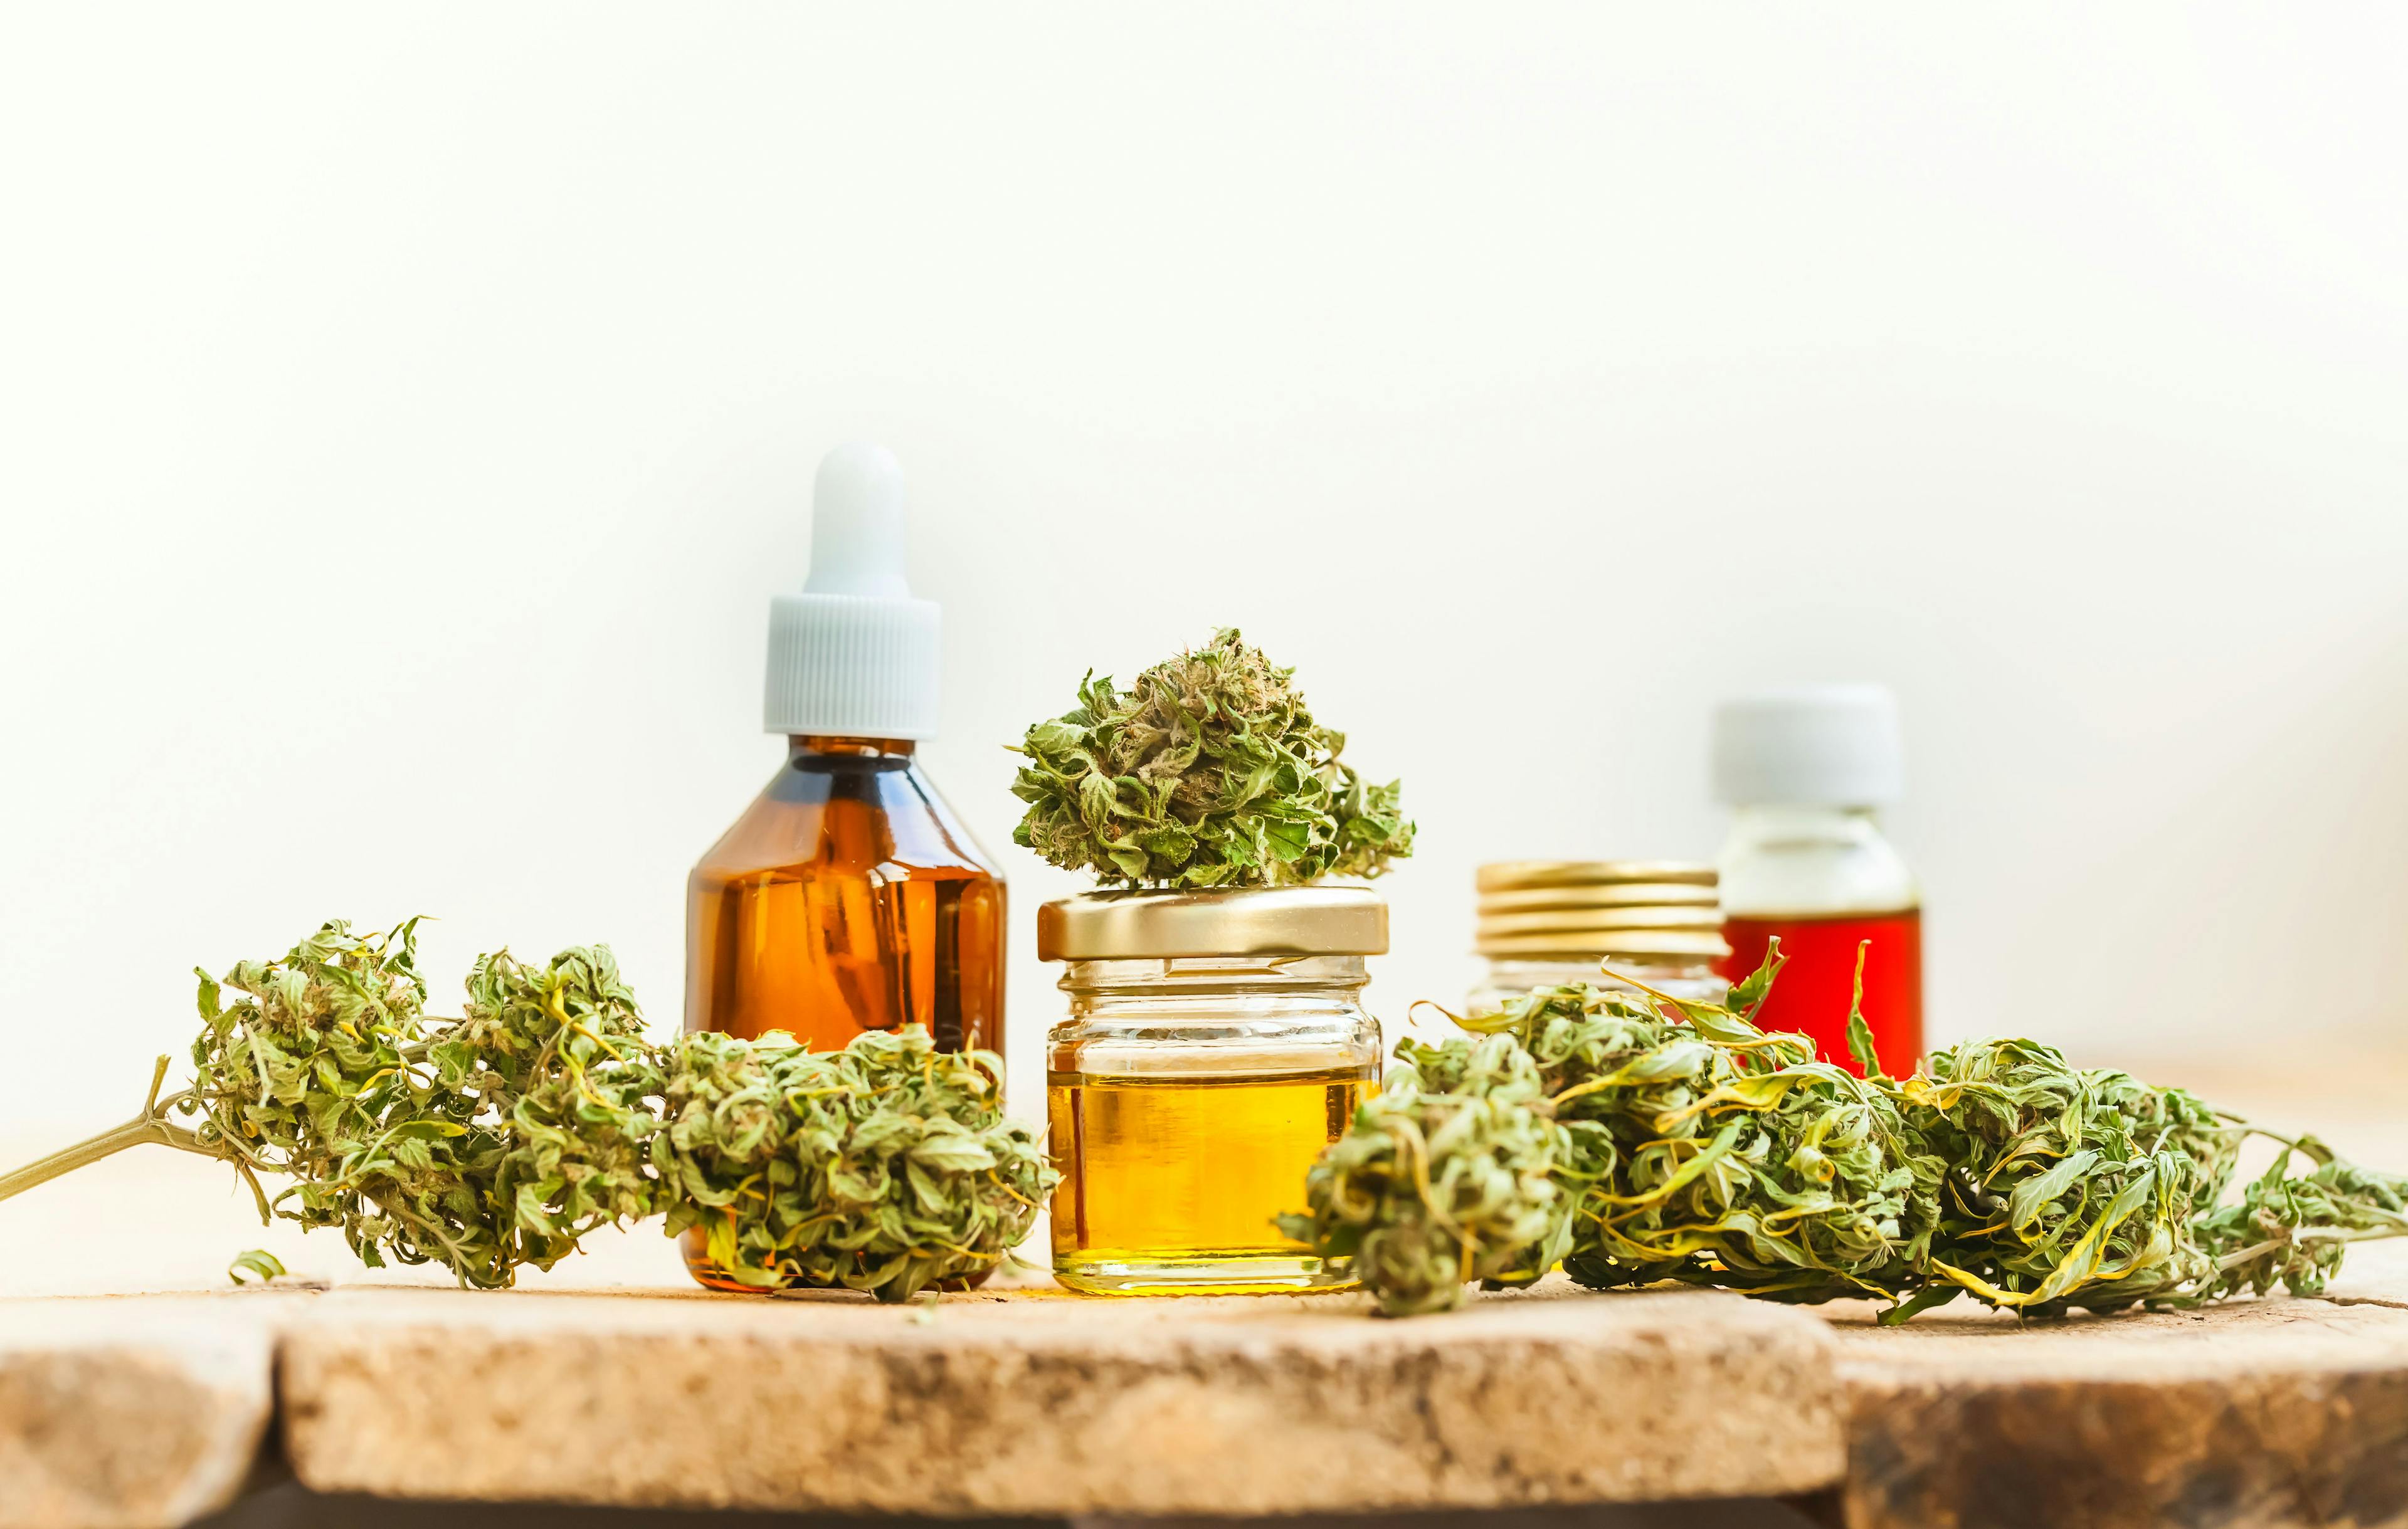 74% of Physicians Say They Would Recommend Cannabis If It Were Legal Federally